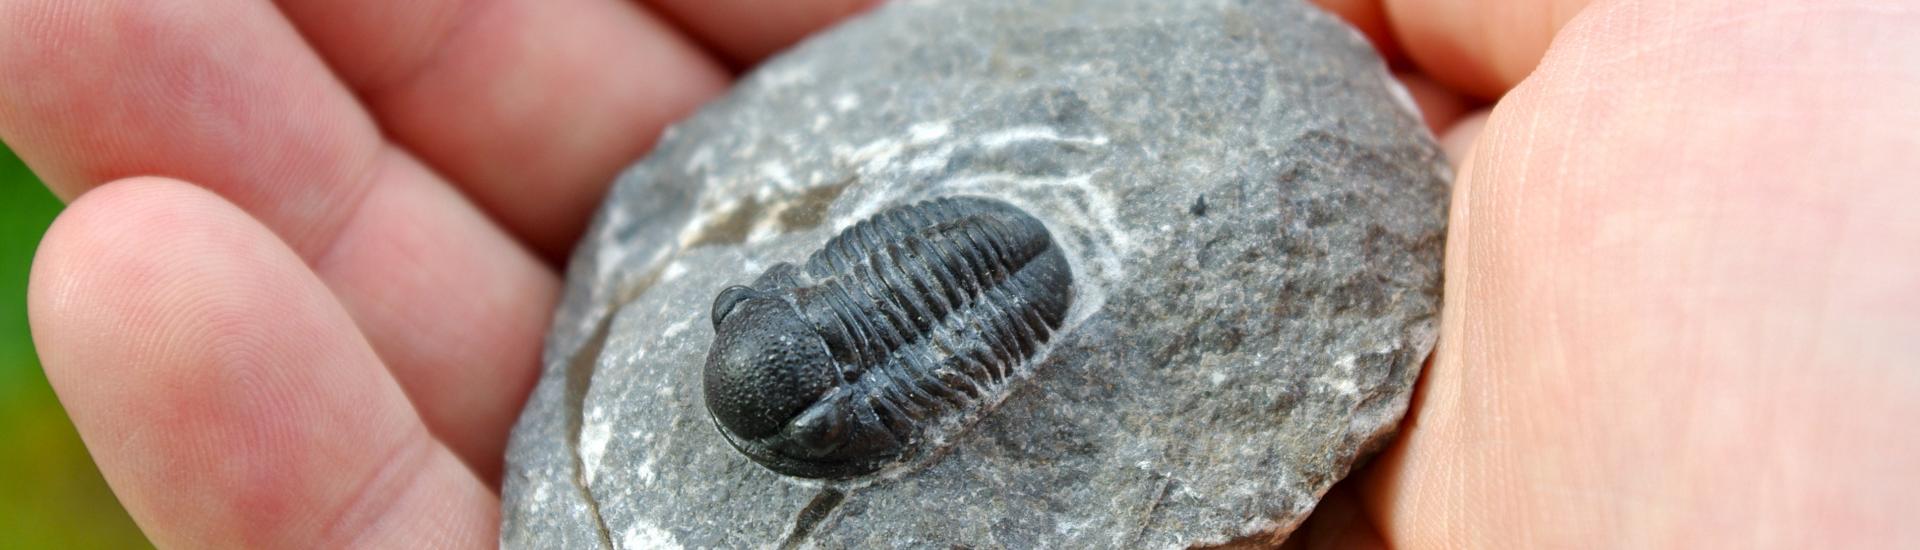 A close up picture of a fossil being held in a hand 